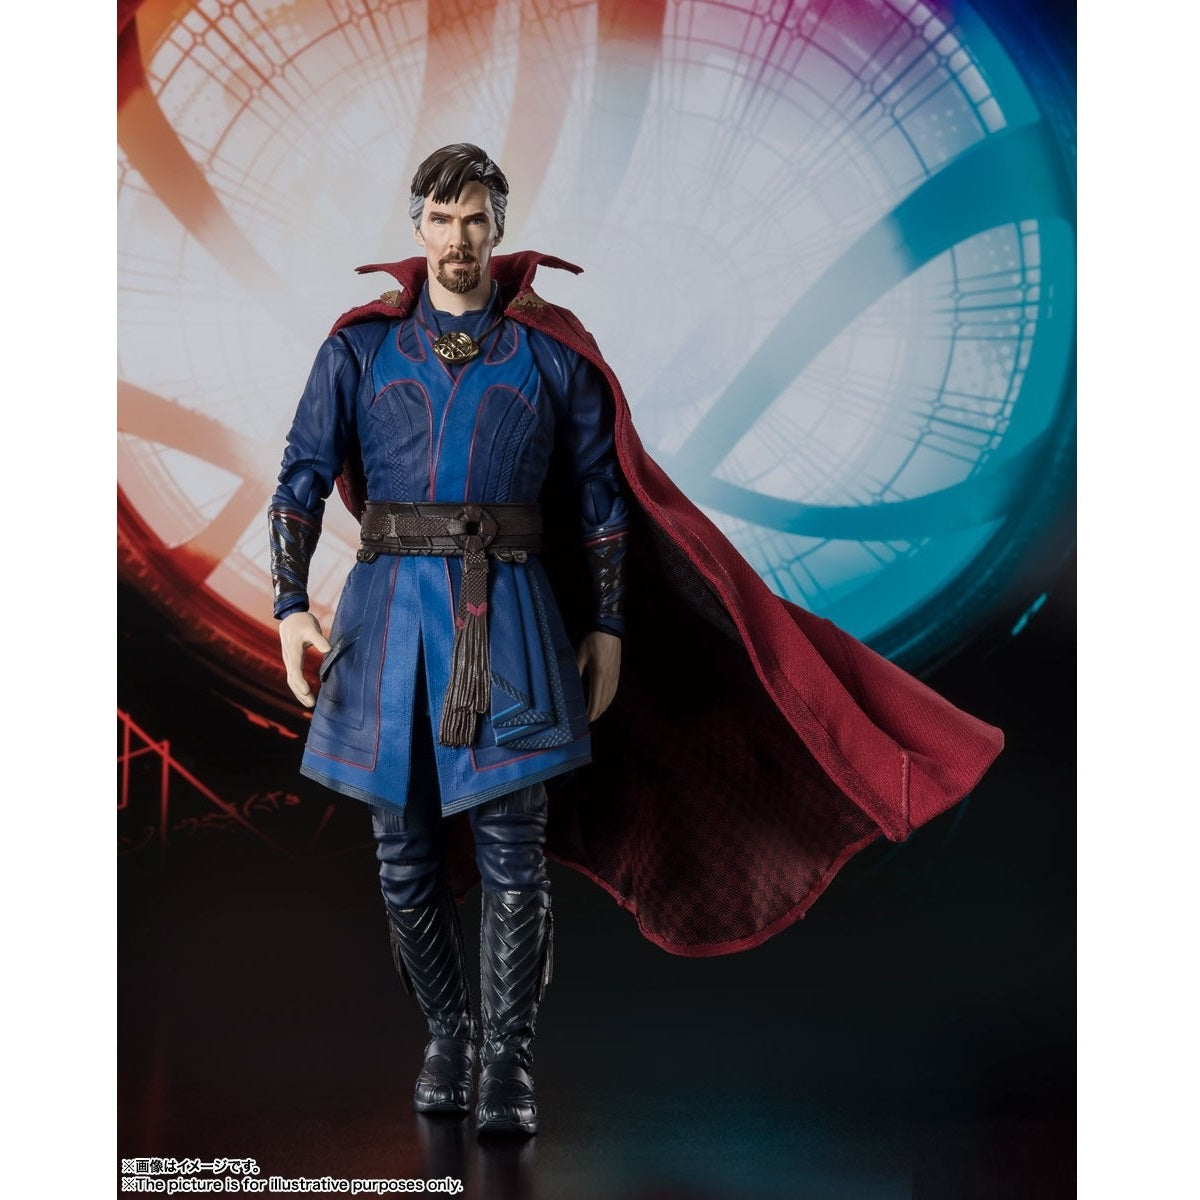 S.H.Figuarts Doctor Strange (Doctor Strange in the Multiverse of Madness) (Completed)-Bandai-Ace Cards & Collectibles